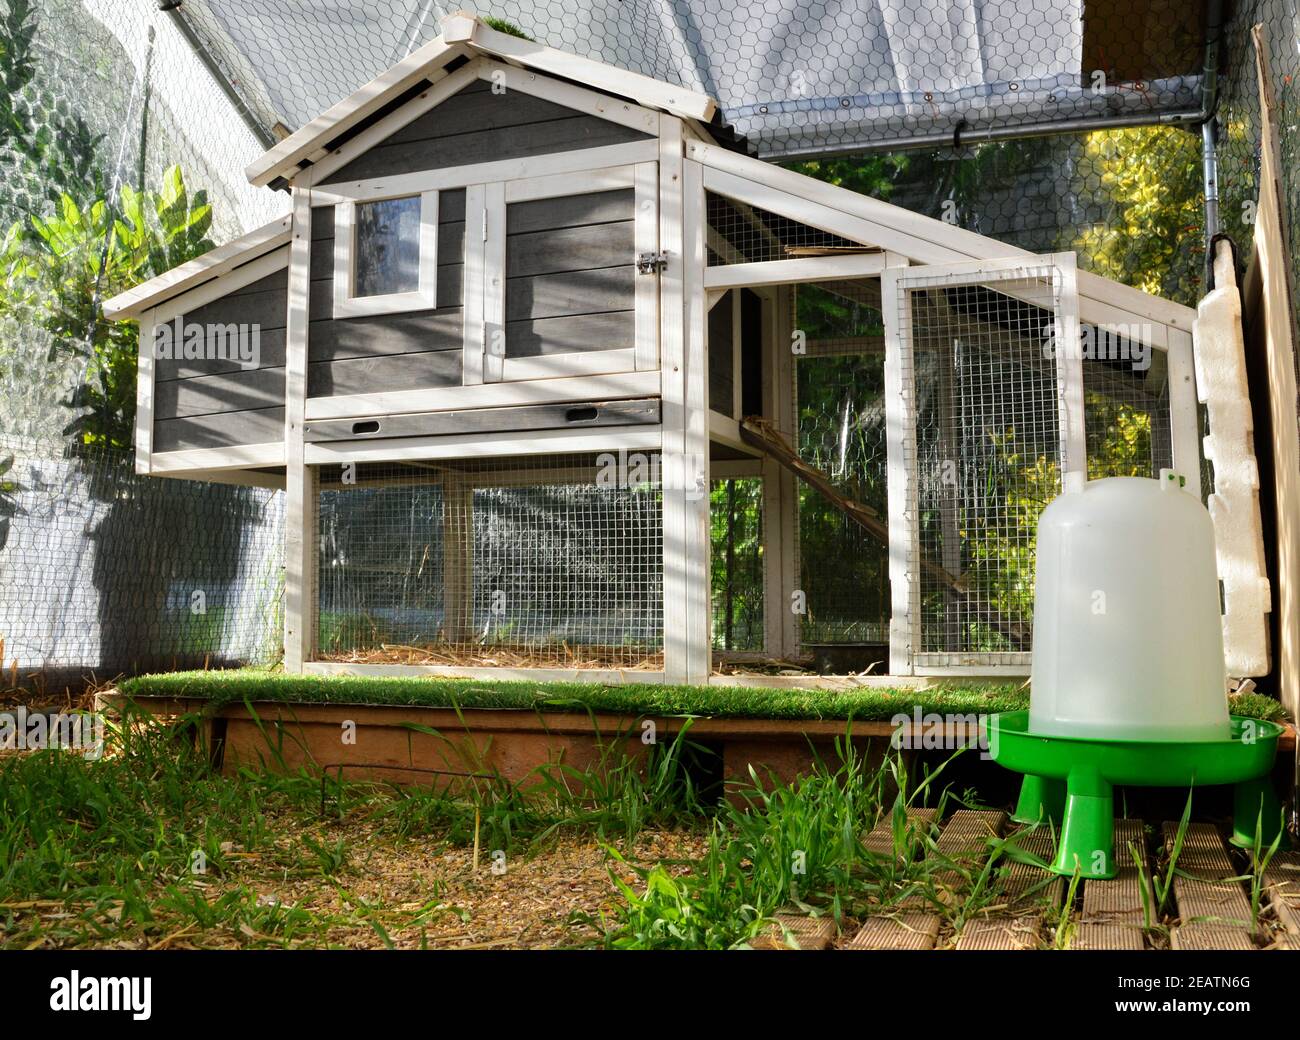 A hen house or chicken coop Stock Photo